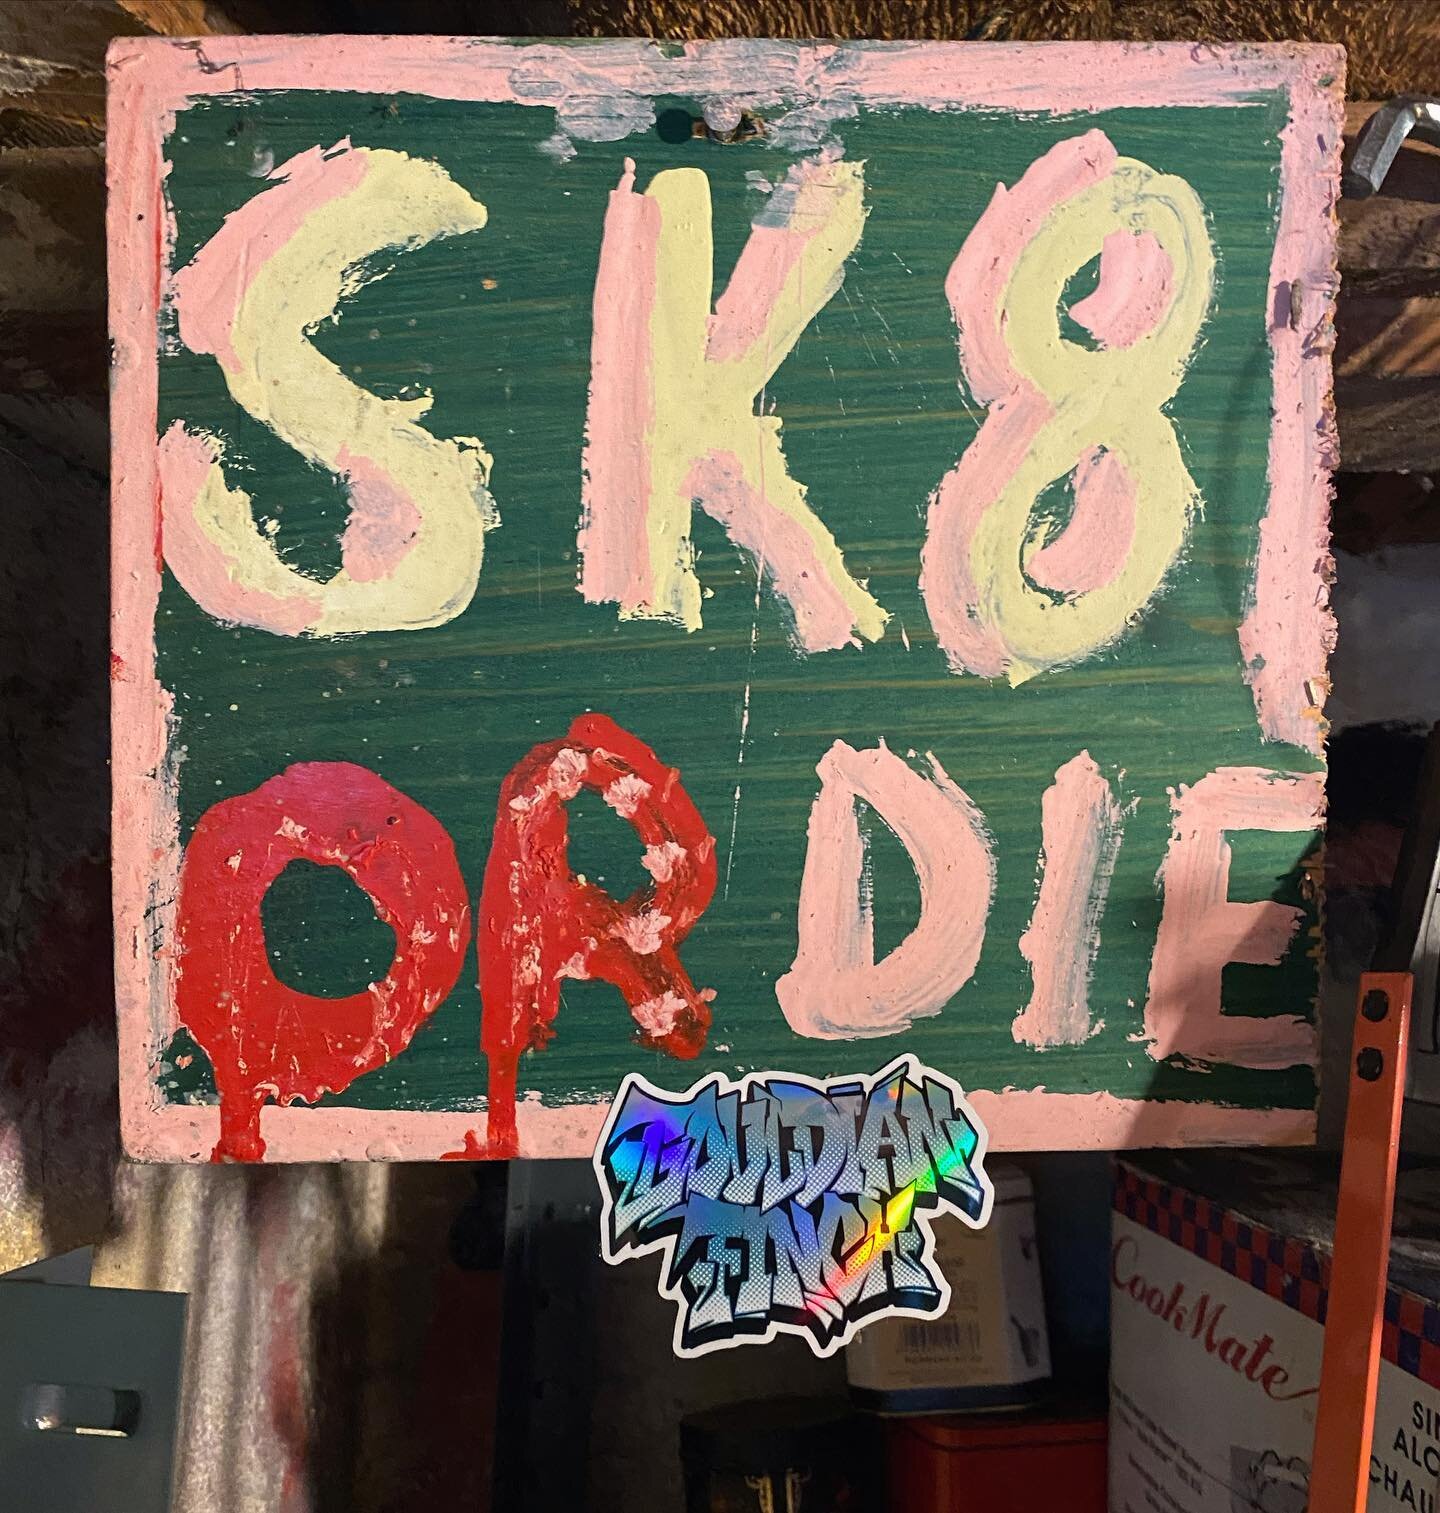 Forever Young. My &lsquo;Sk8 or Die&rsquo; sign from 1990 meets a new G🦜F logo made by the talented @terrormachine_std